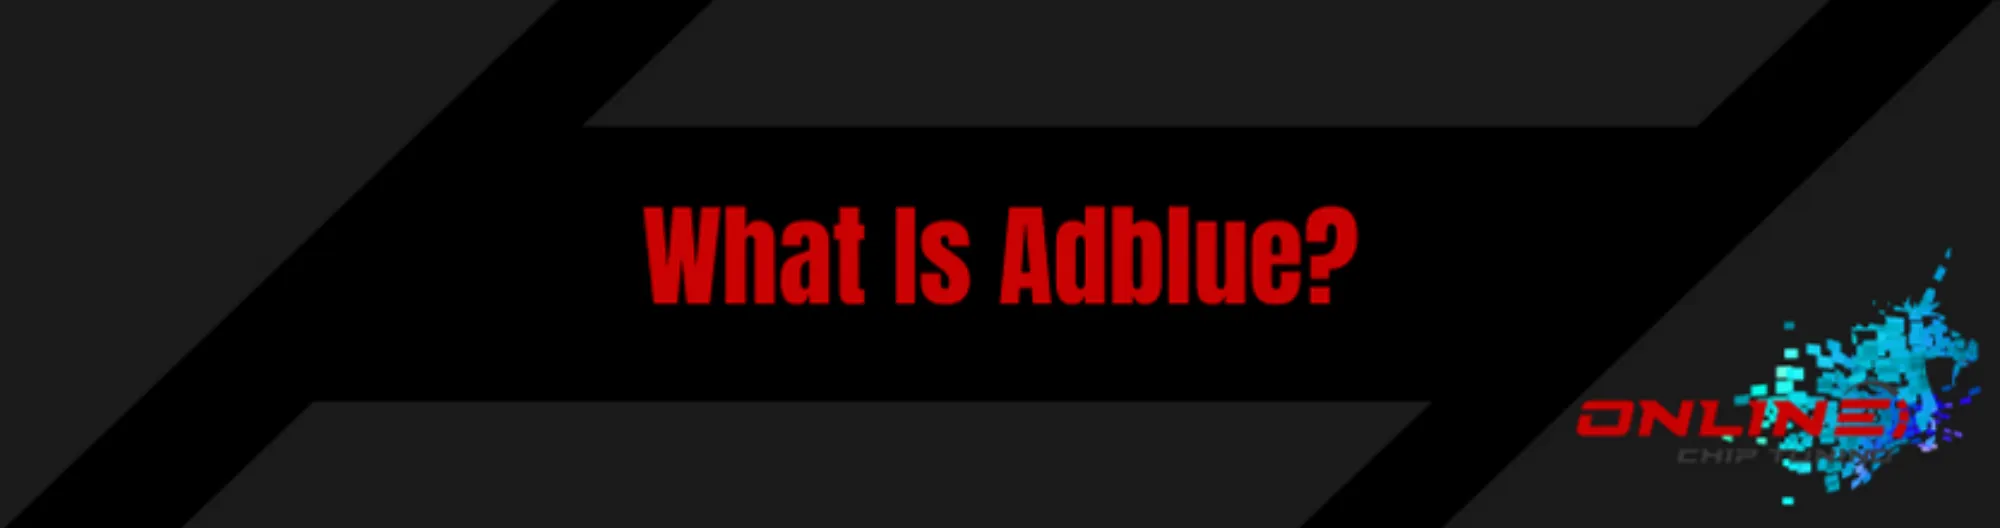 What Is Adblue?